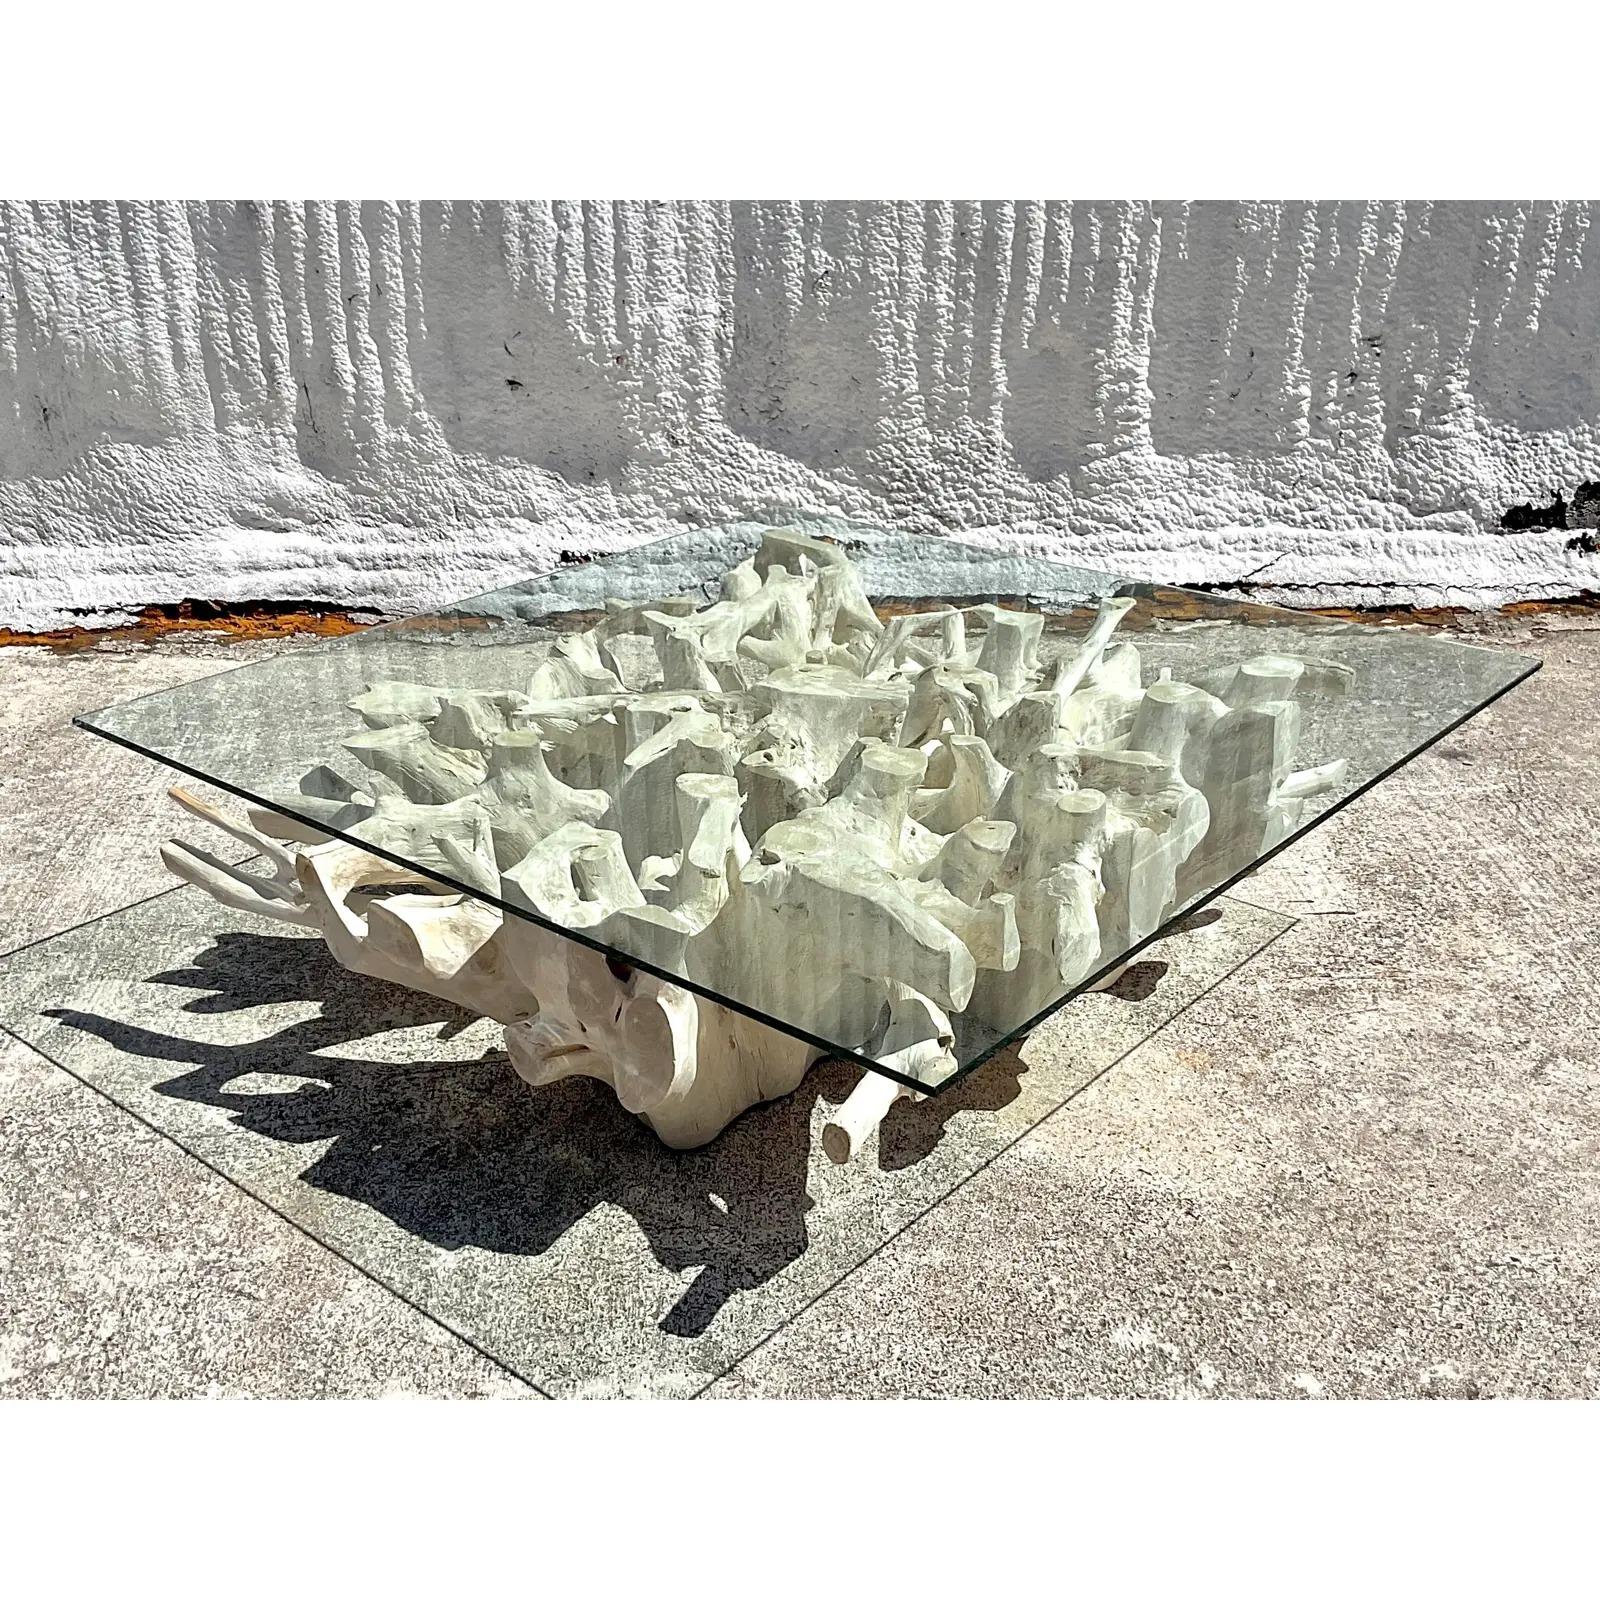 A spectacular vintage Coast pal coffee table. A chic monumental Teak roof pedestal with a thick glass top. Made by the coveted Walker Zabriskie in Palm Beach. Acquired from a Palm Beach estate.